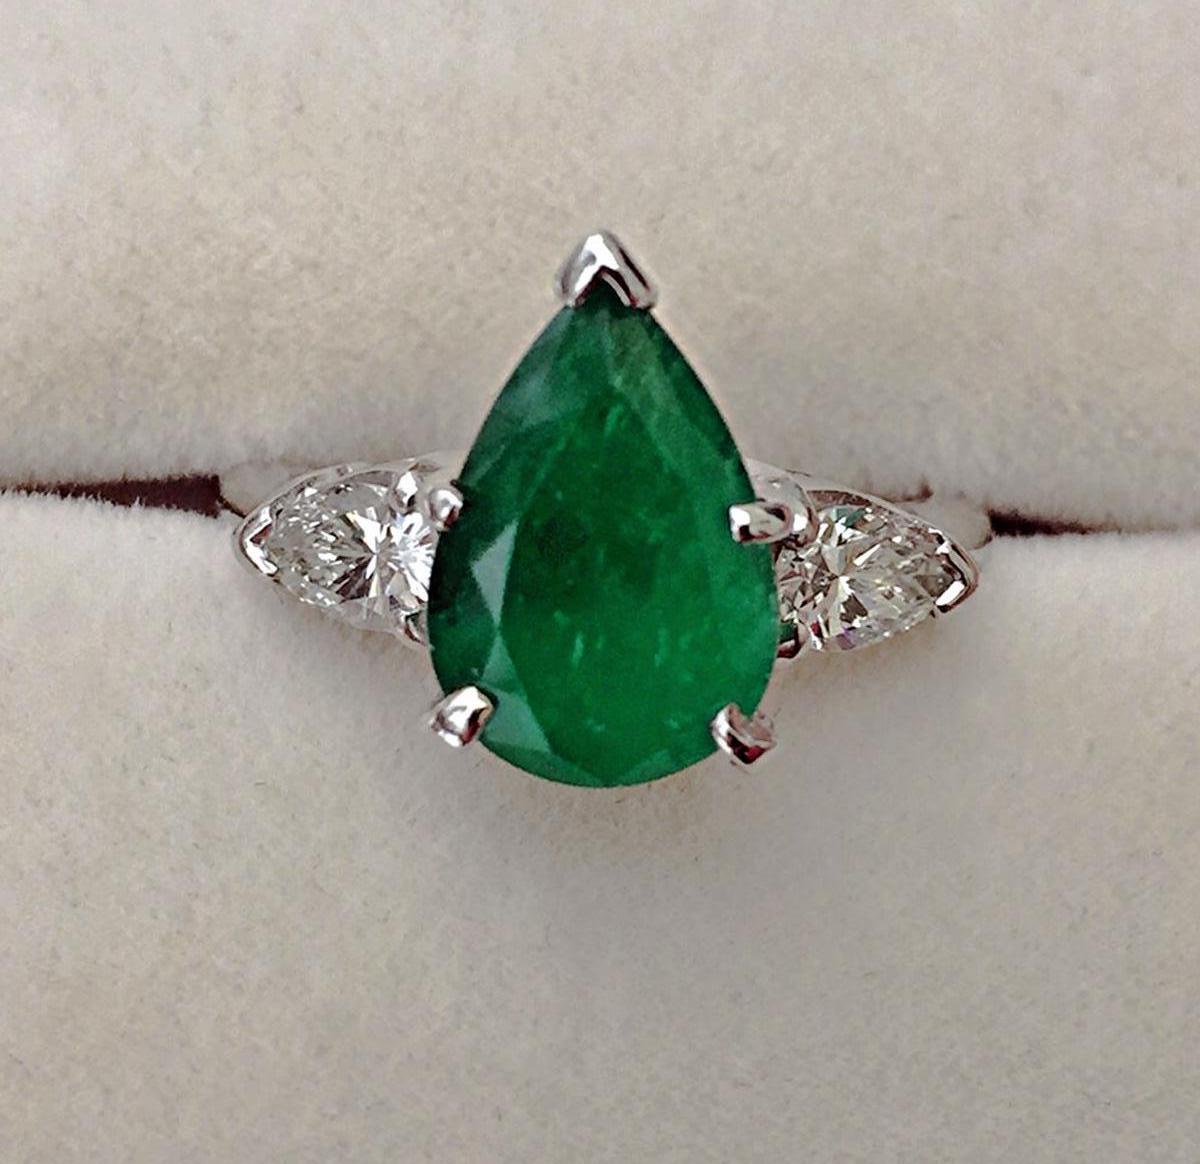 Platinum Emerald & Diamond Engagement Ring 3 Stone Pear Shape 2.76 Carat 
Primary Stones: Natural Colombian Emerald
Shape or Cut : Pear Cut
Average Color/Clarity : Intense AAAA Fine Green Color/Clarity VS
Total Emerald Weight : 2.20 Carats  
Other